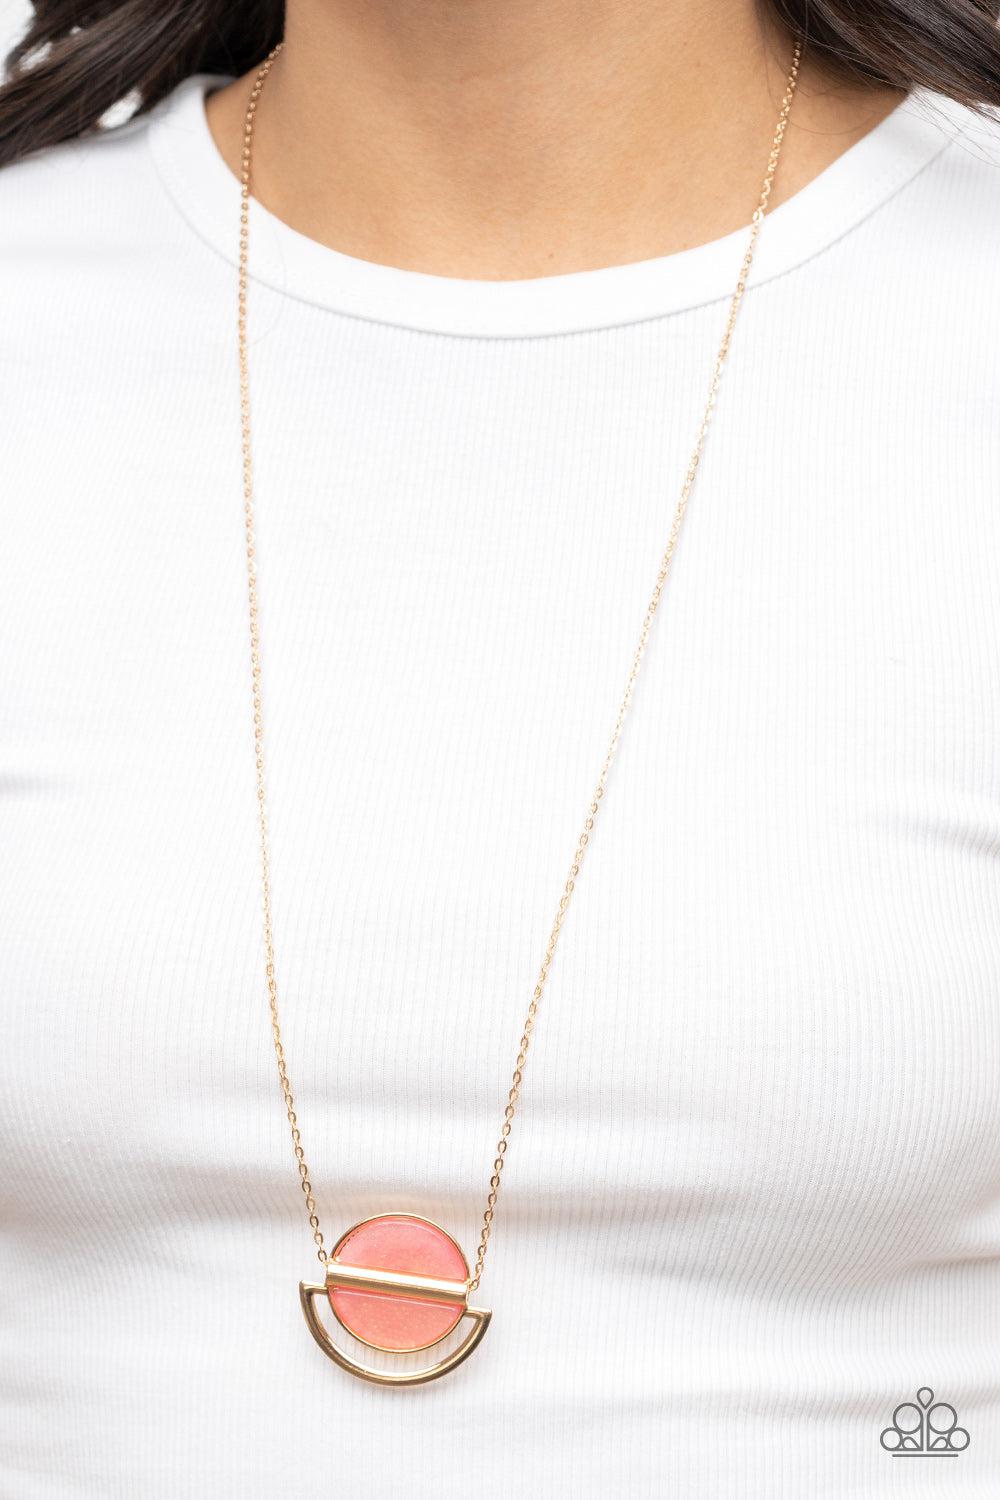 Ethereal Eclipse Pink Stone &amp; Gold Necklace - Paparazzi Accessories-on model - CarasShop.com - $5 Jewelry by Cara Jewels